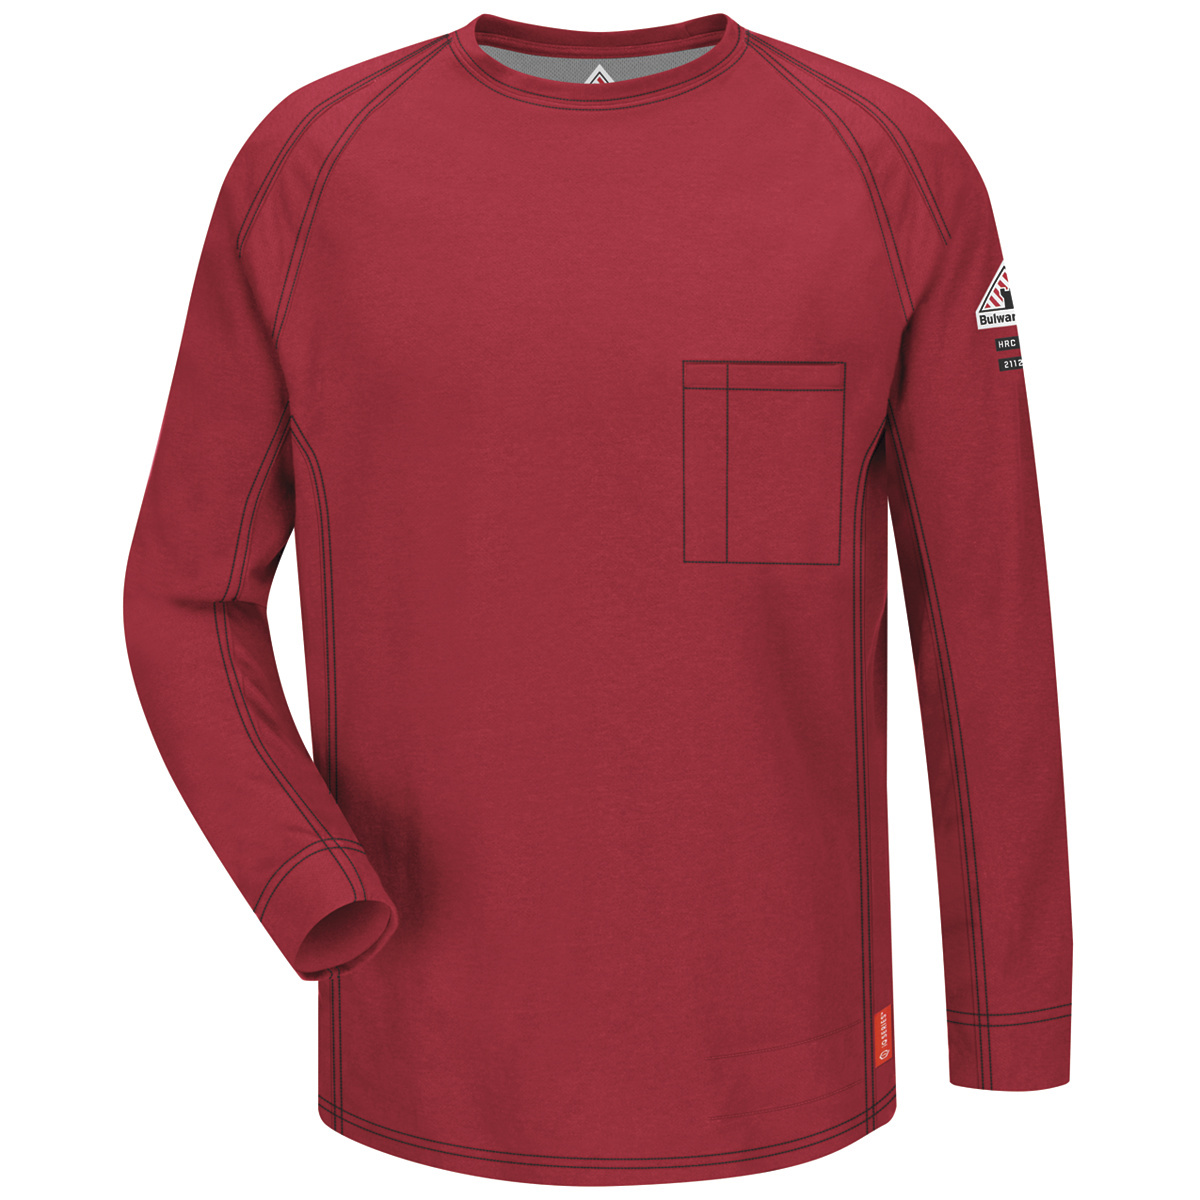 Bulwark® 3X Tall Red Westex G2™ fabrics by Milliken®/Cotton/Polyester/Polyoxadiazole Flame Resistant Shirt